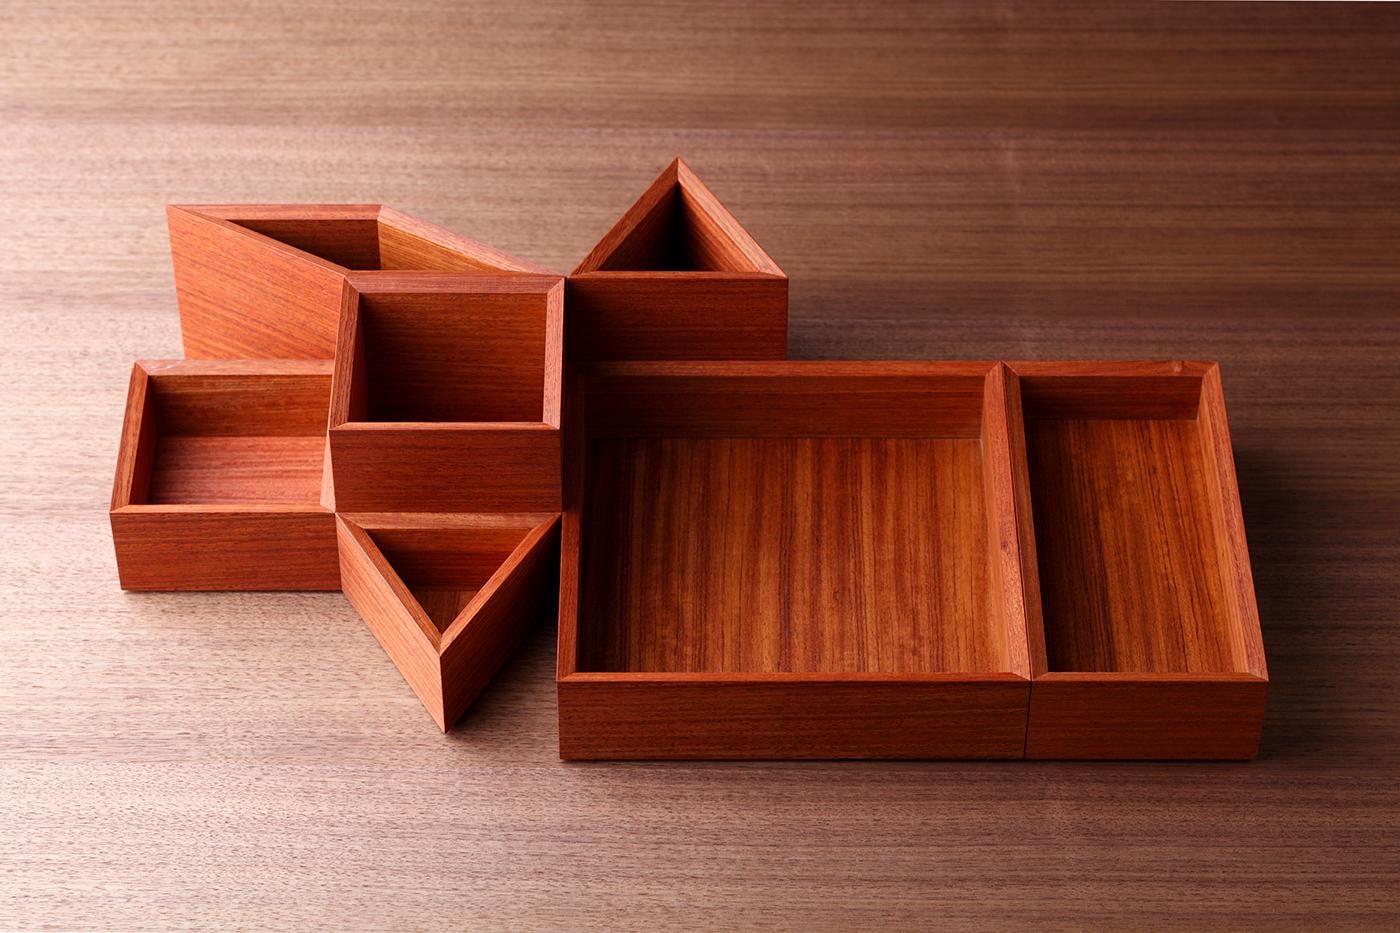 japan craft wood stationary geometric traditional Customize container Technique natural